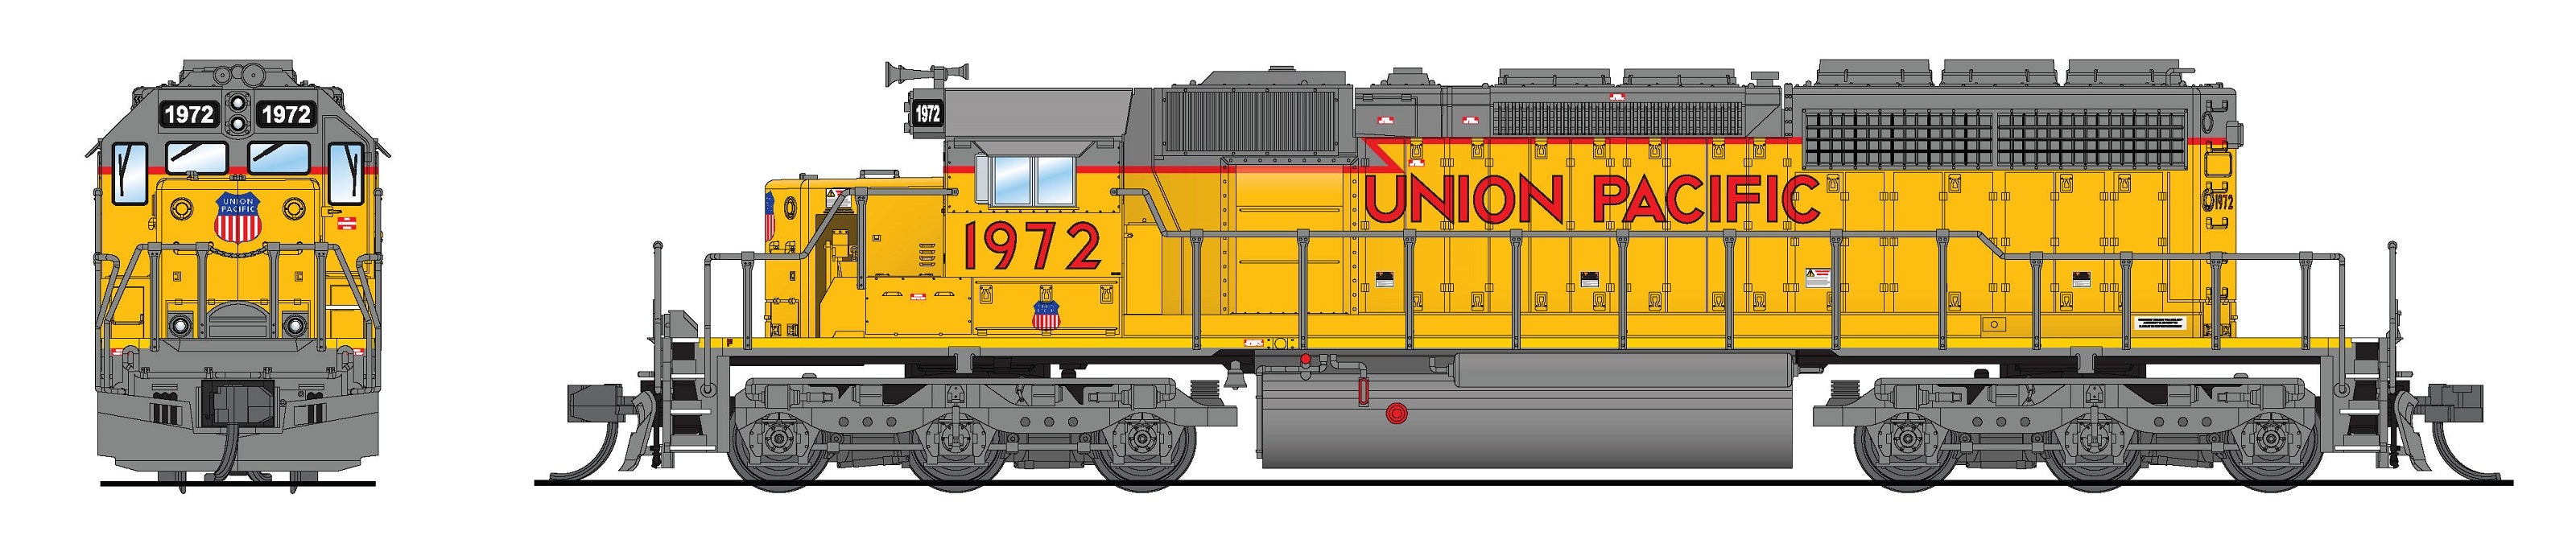 9959 EMD SD40-2, UP 1972, 2010's Appearance, No-Sound / DCC-Ready, N